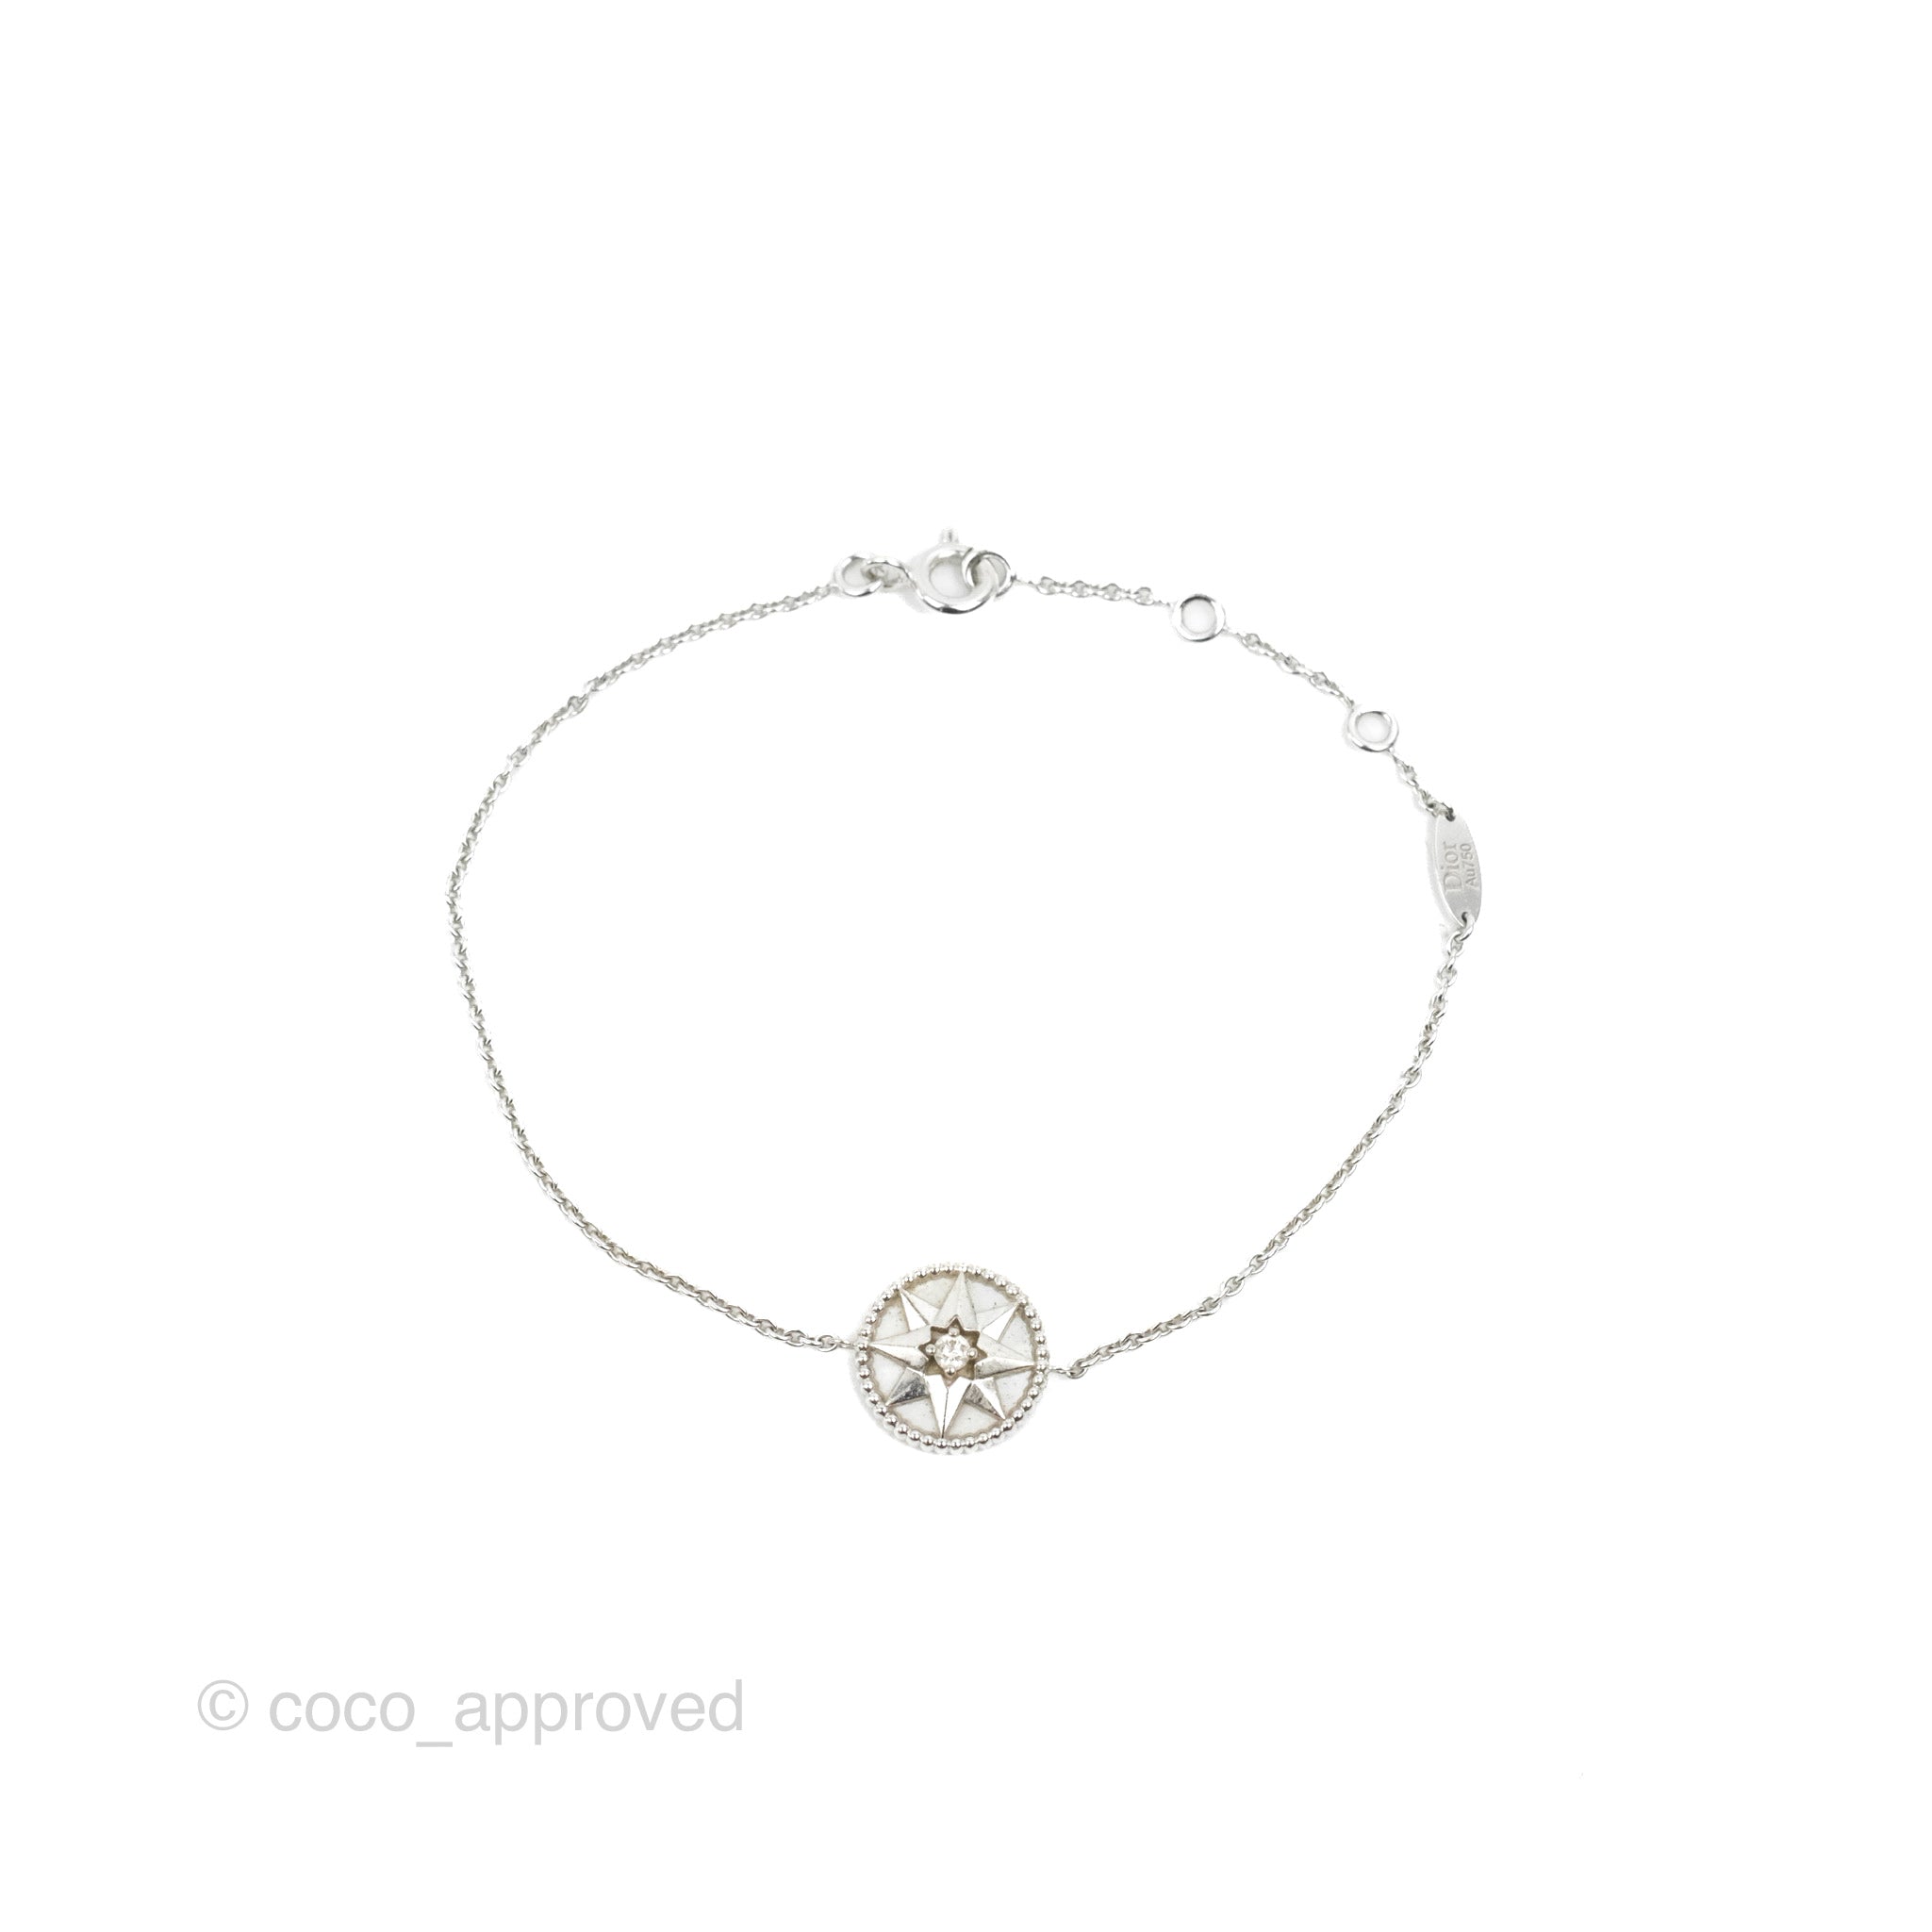 Rose Des Vents and Rose Céleste Bracelet Yellow and White Gold, Diamond,  Mother-of-Pearl and Onyx